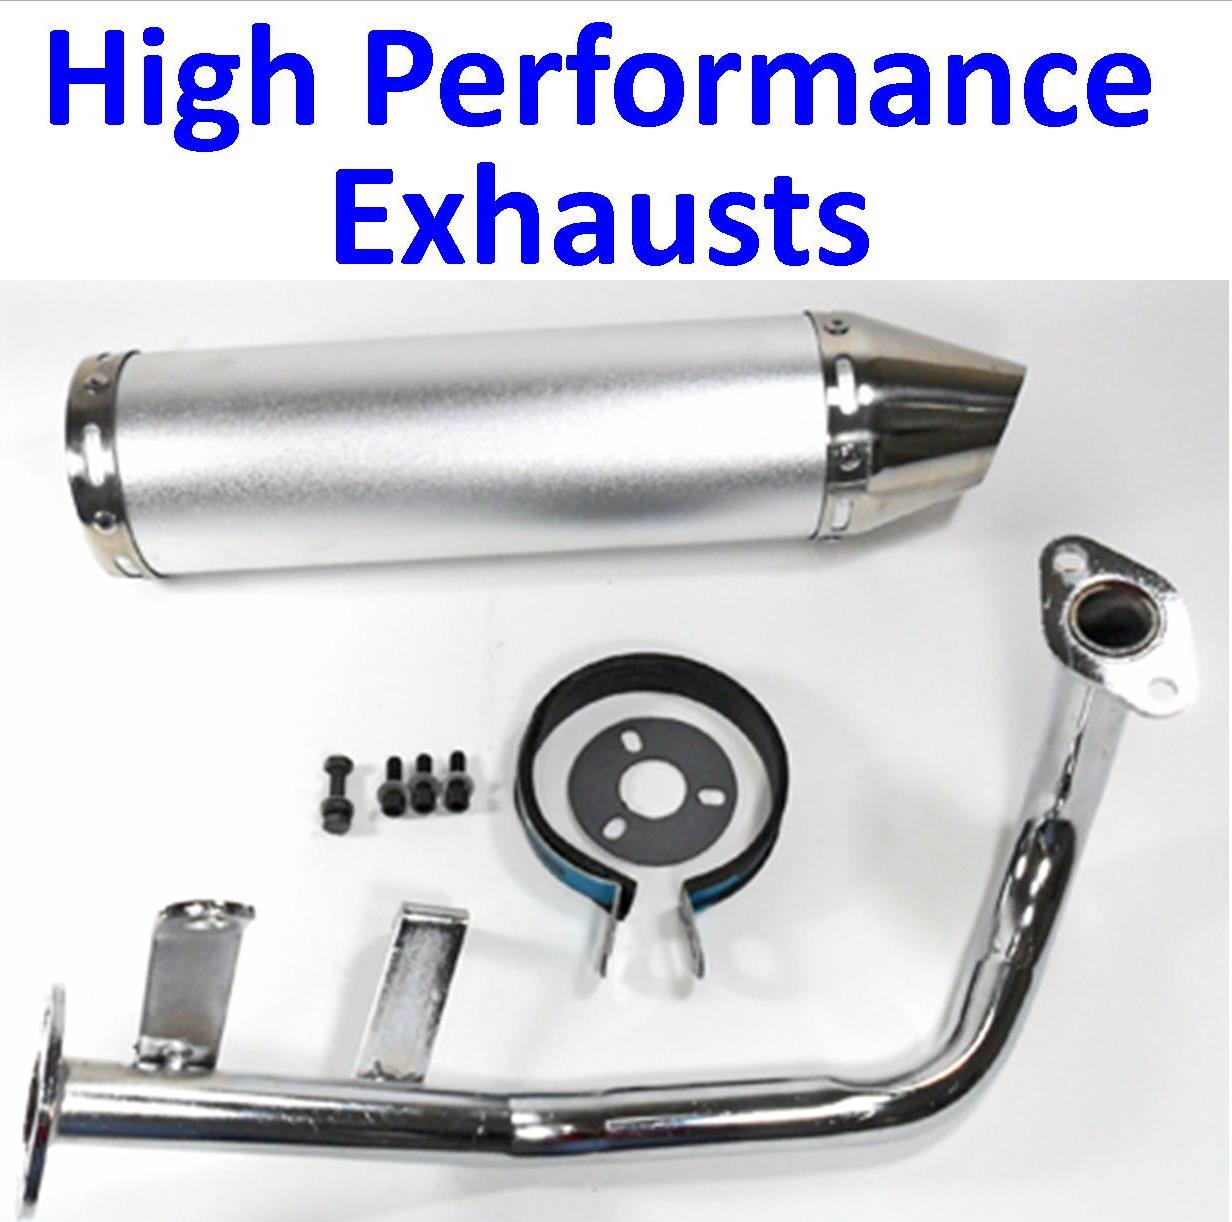 High Performance Exhausts 49cc-100cc 4 Stroke Scooters